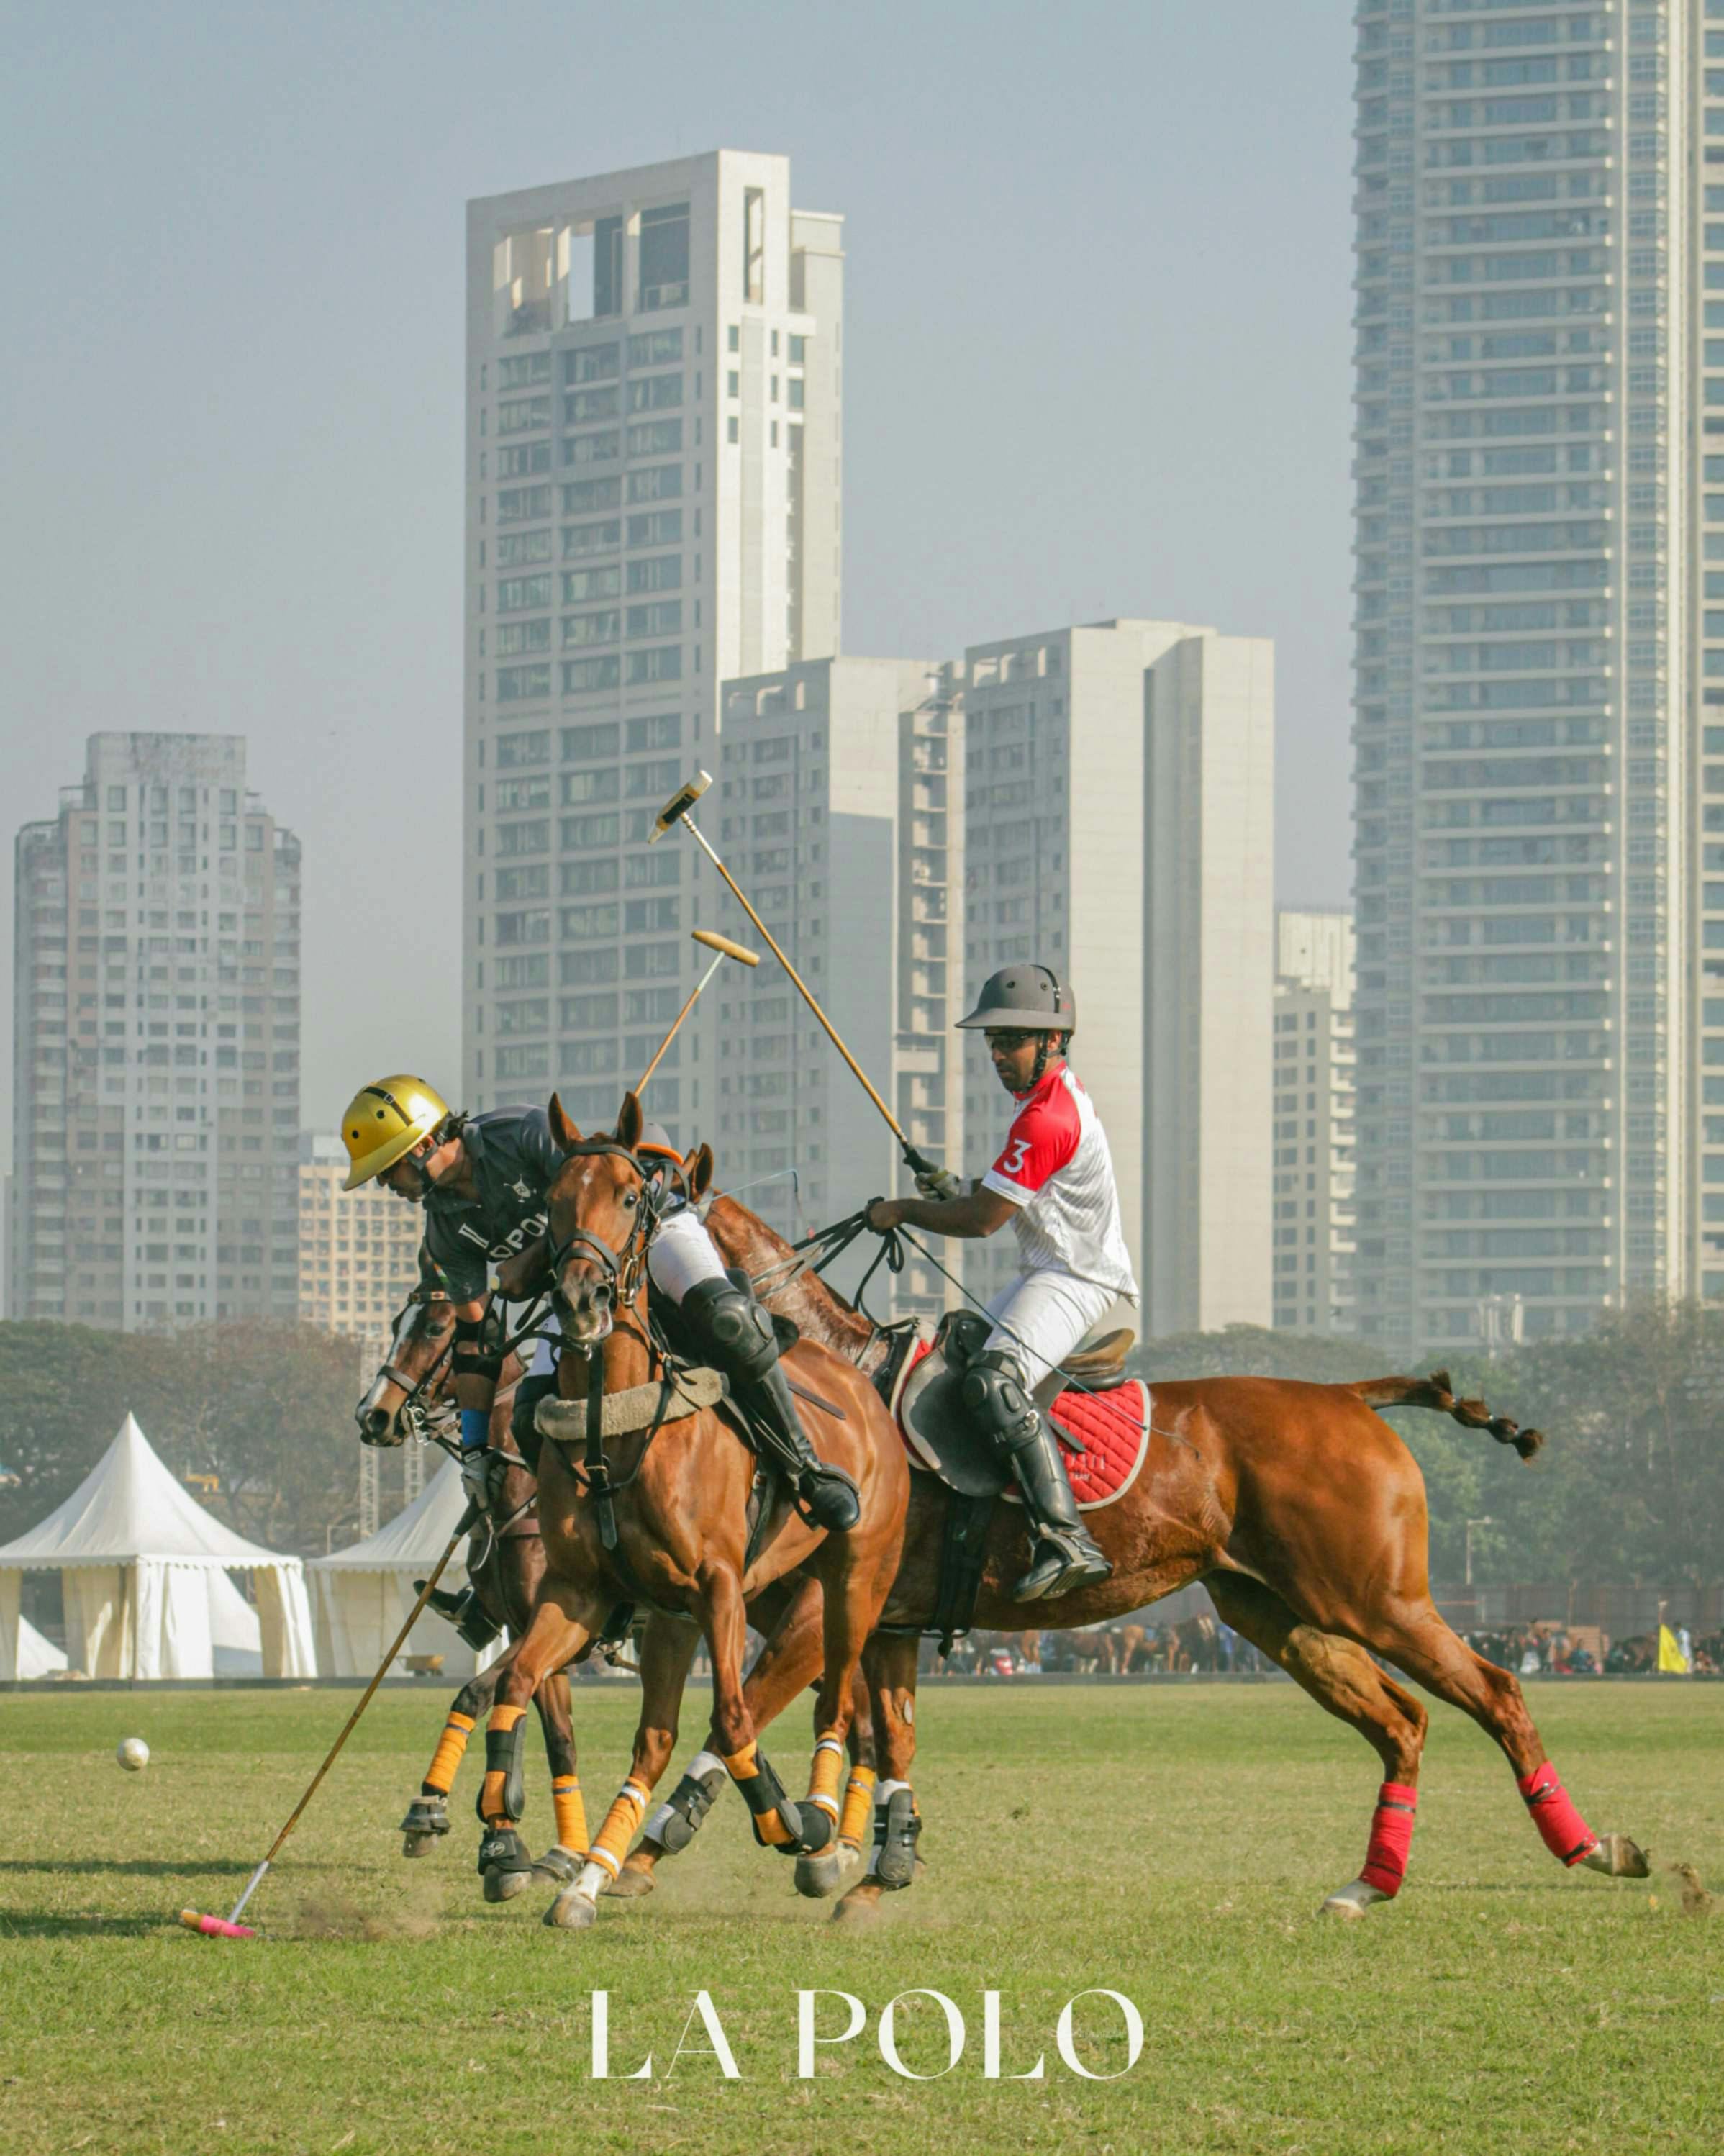 The strategy involved in playing polo is fascinating to observe.